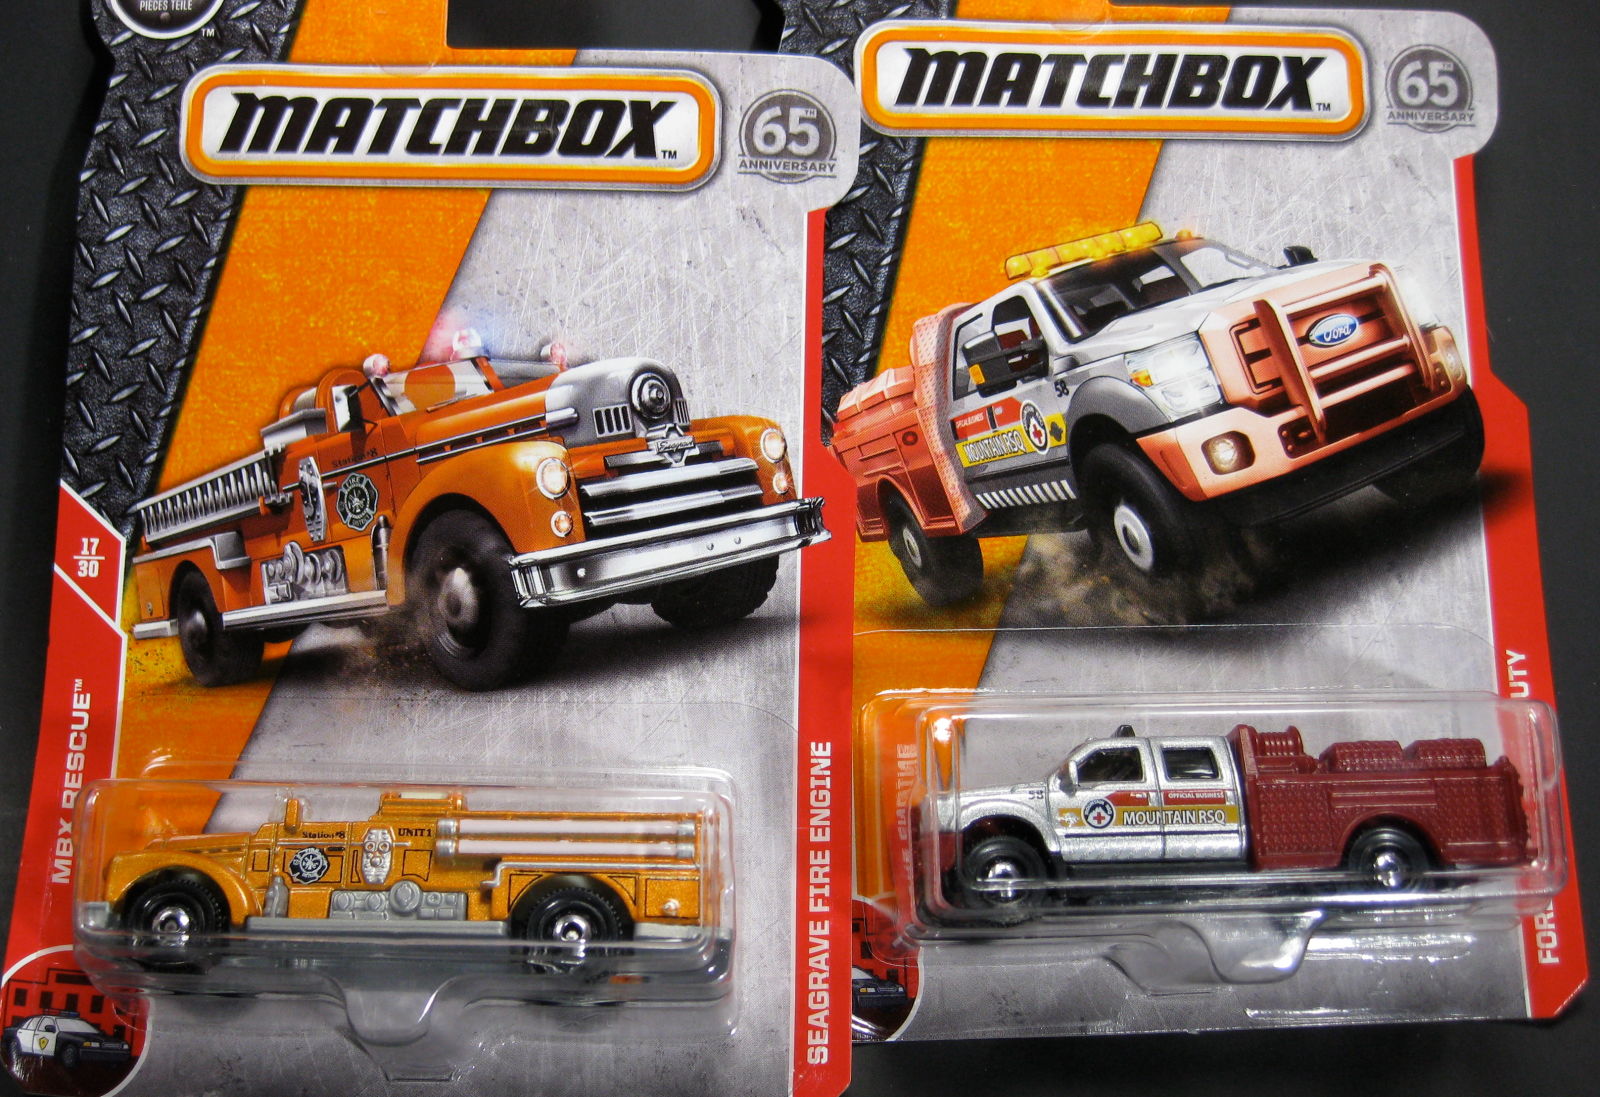 Illustration for article titled Matchbox 2018 now at...Toys R Us?